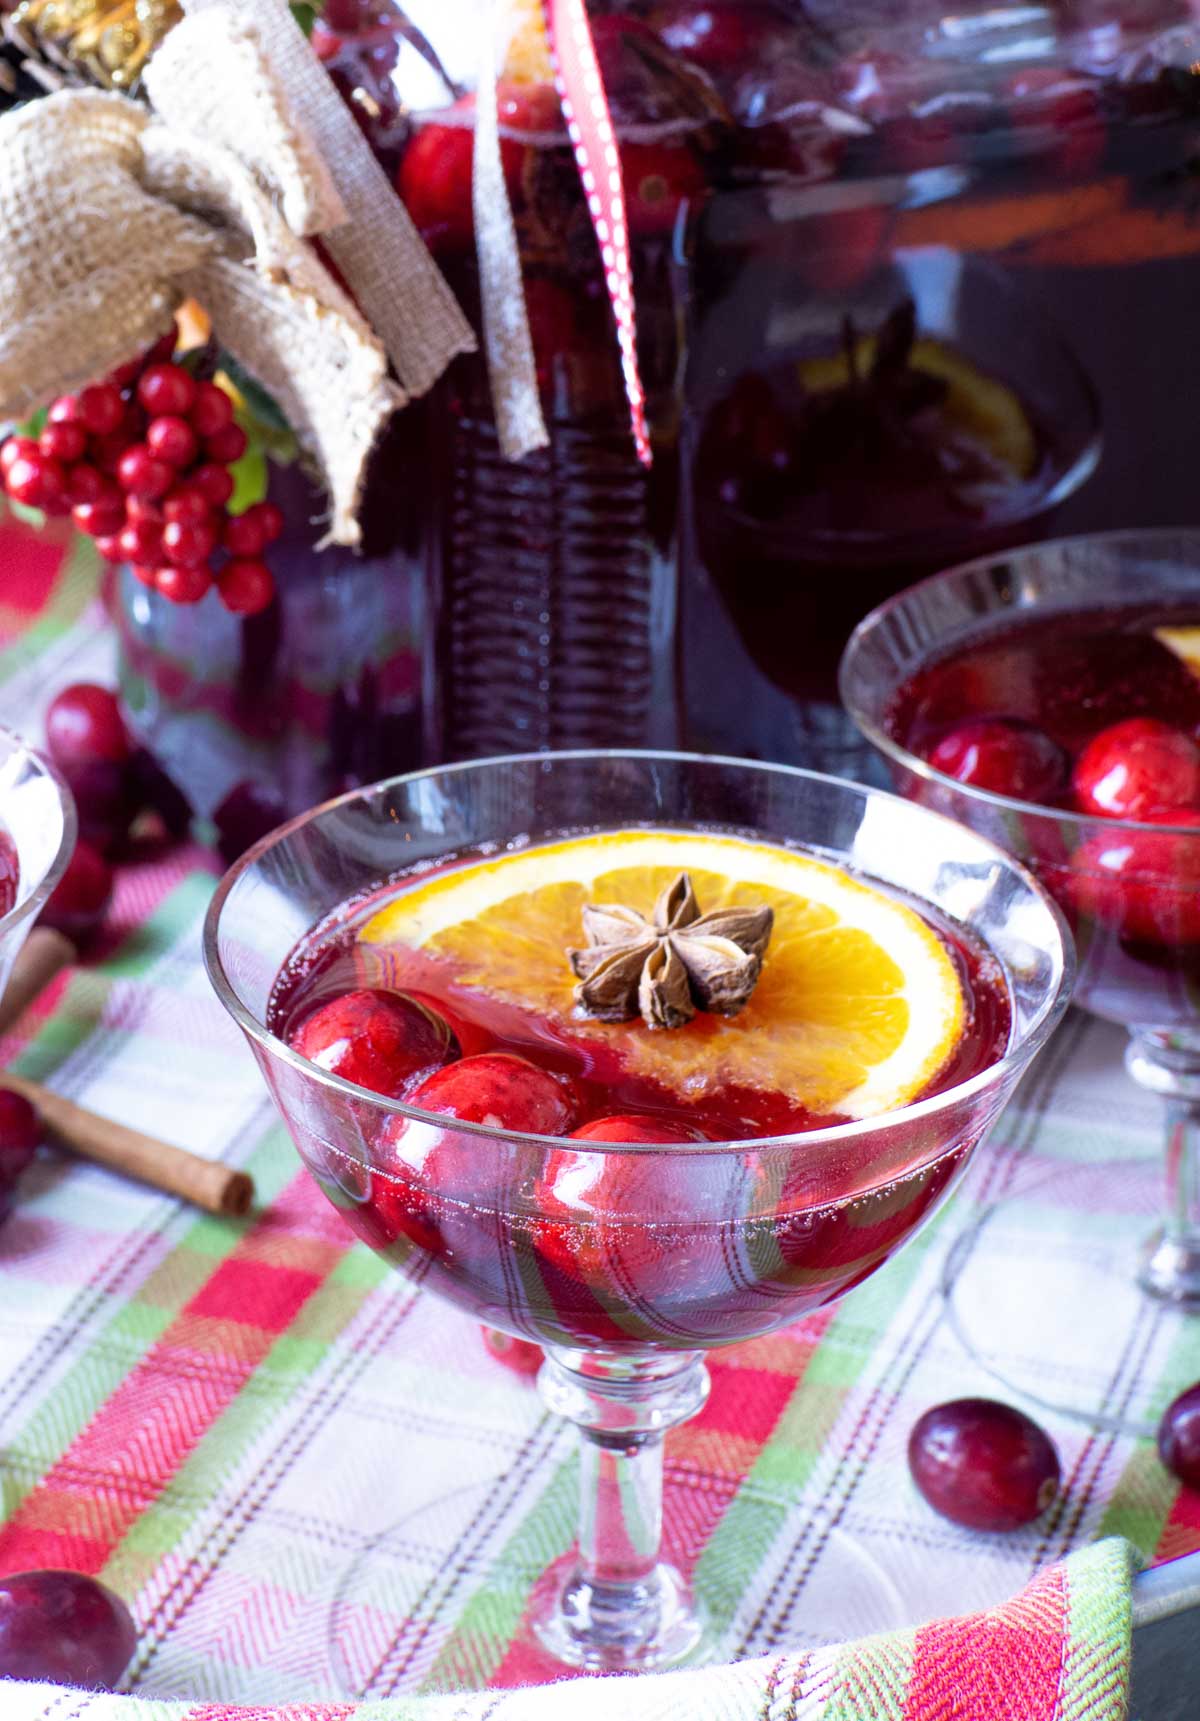 A star anise spice sits atop an orange slice in a cranberry holiday beverage served in a champagne glass